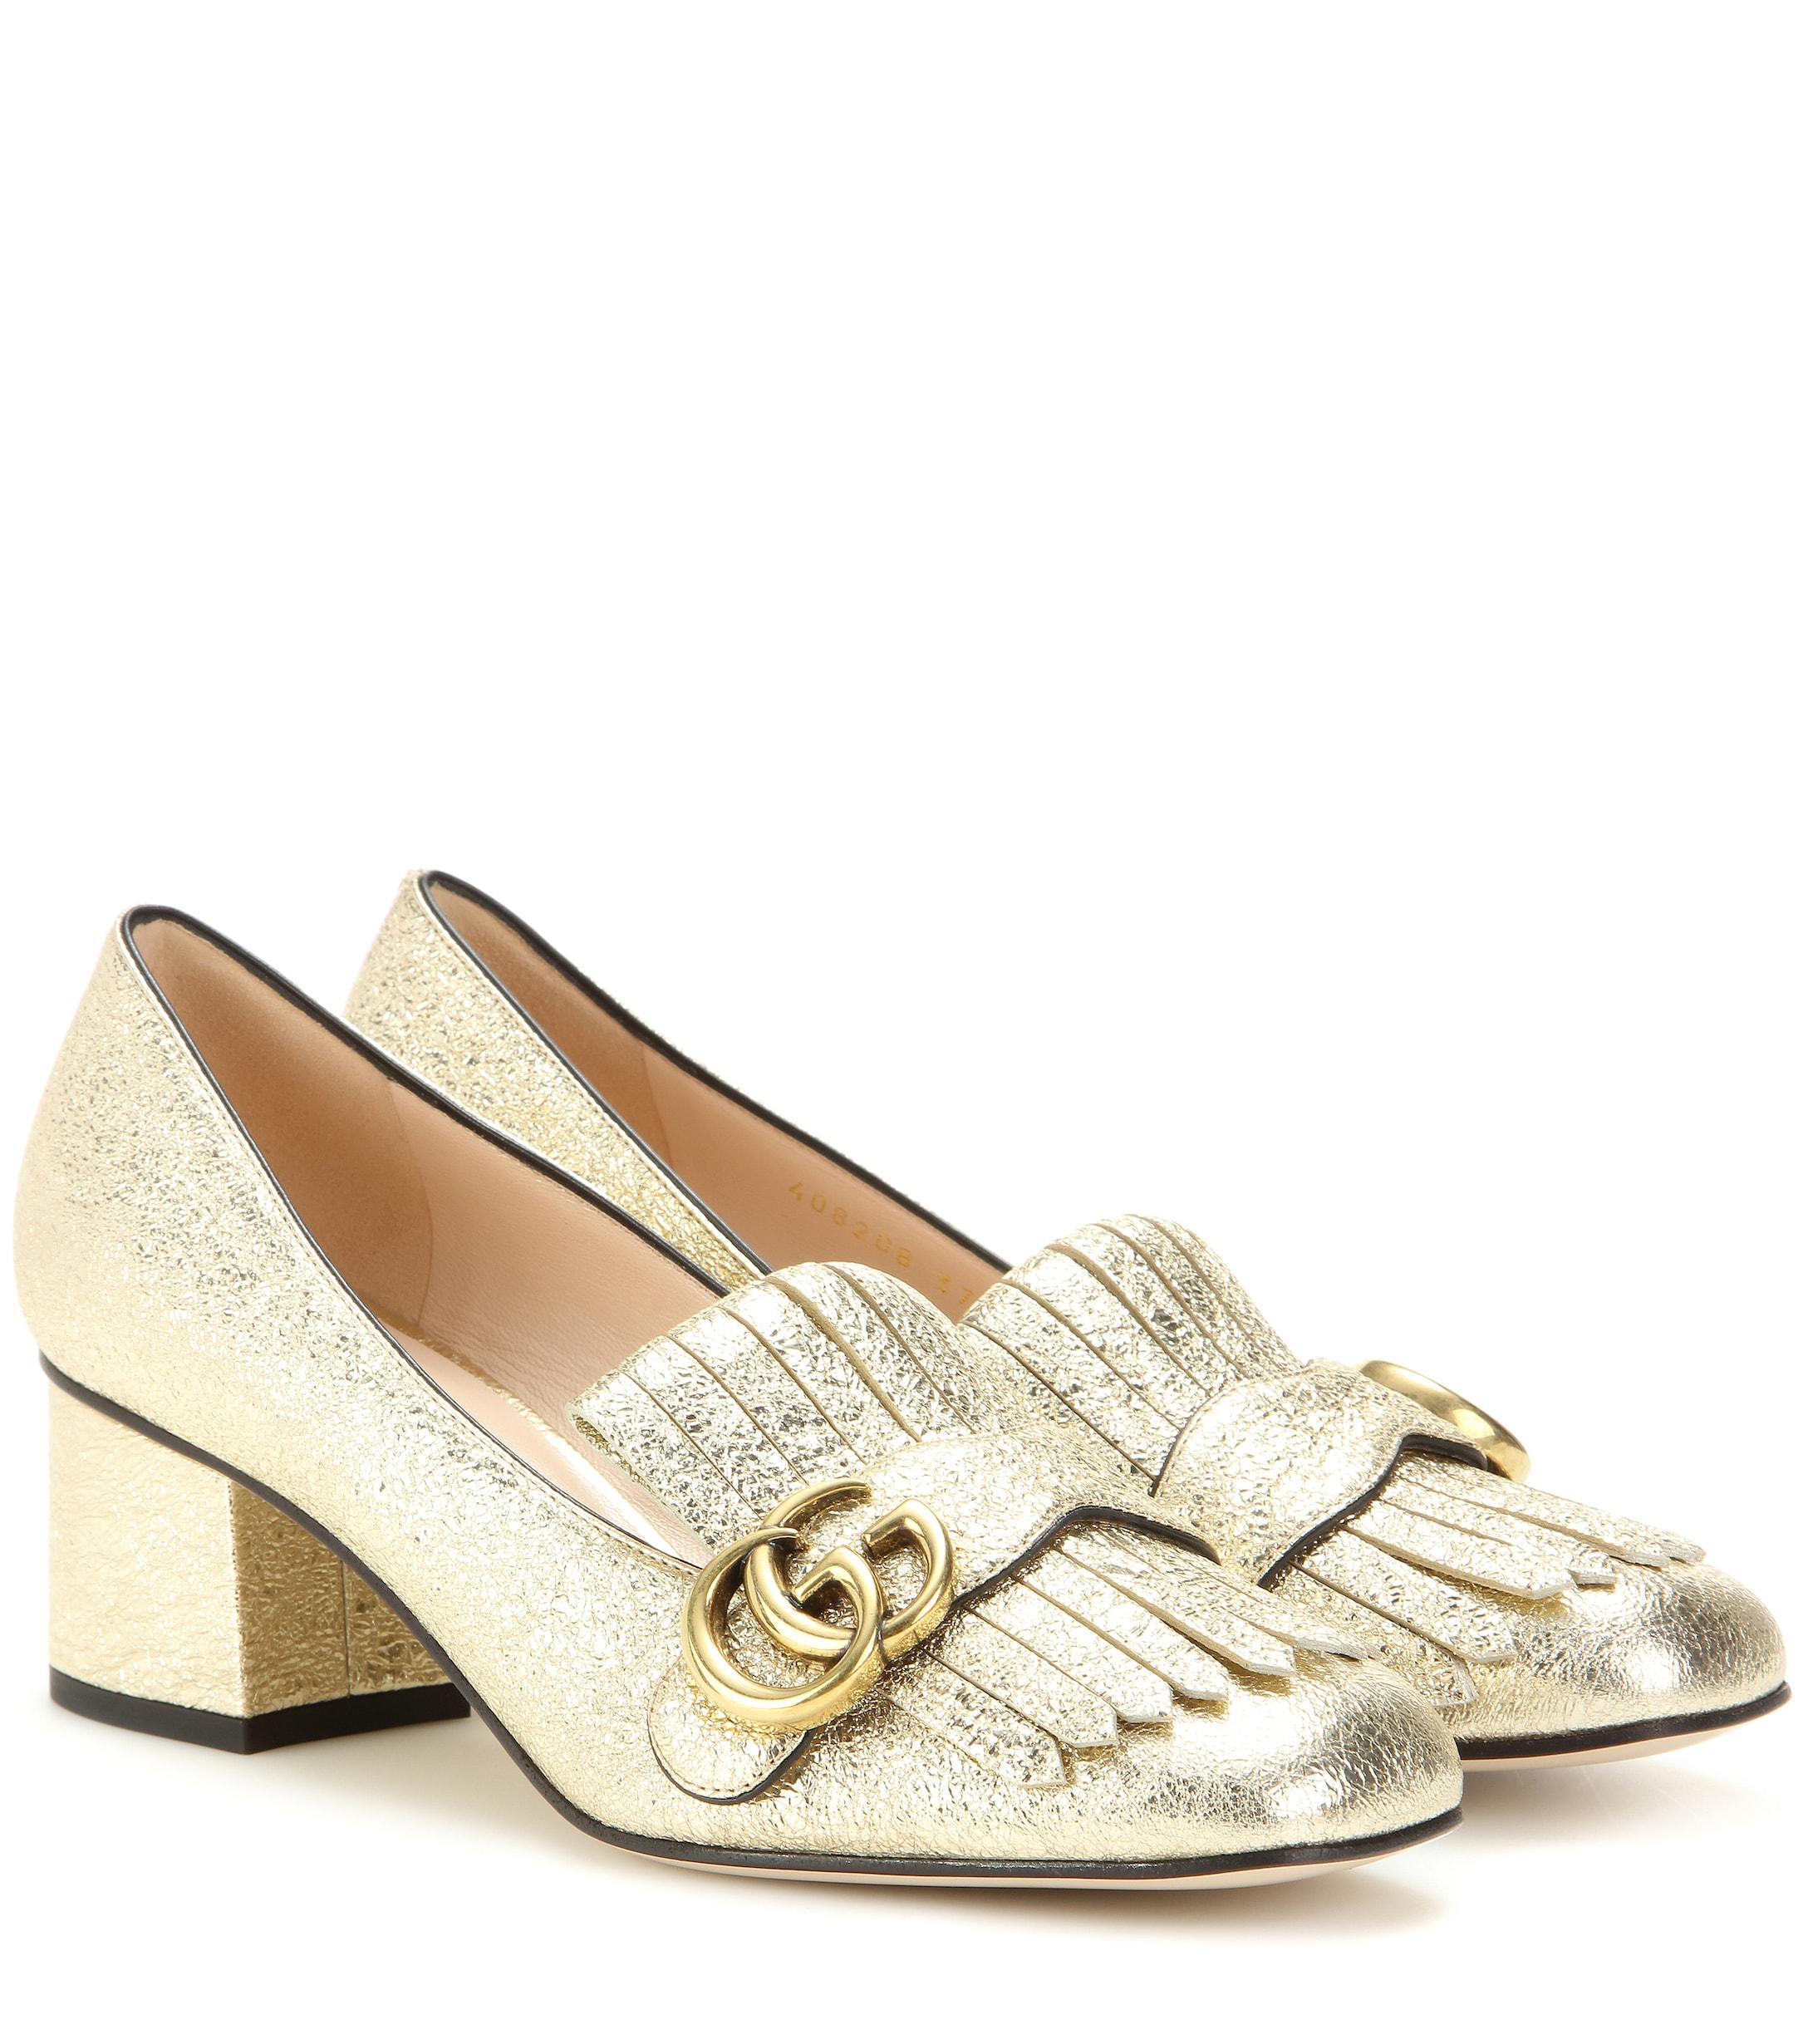 Gucci Marmont Leather Loafer Pumps in Gold (Metallic) - Lyst